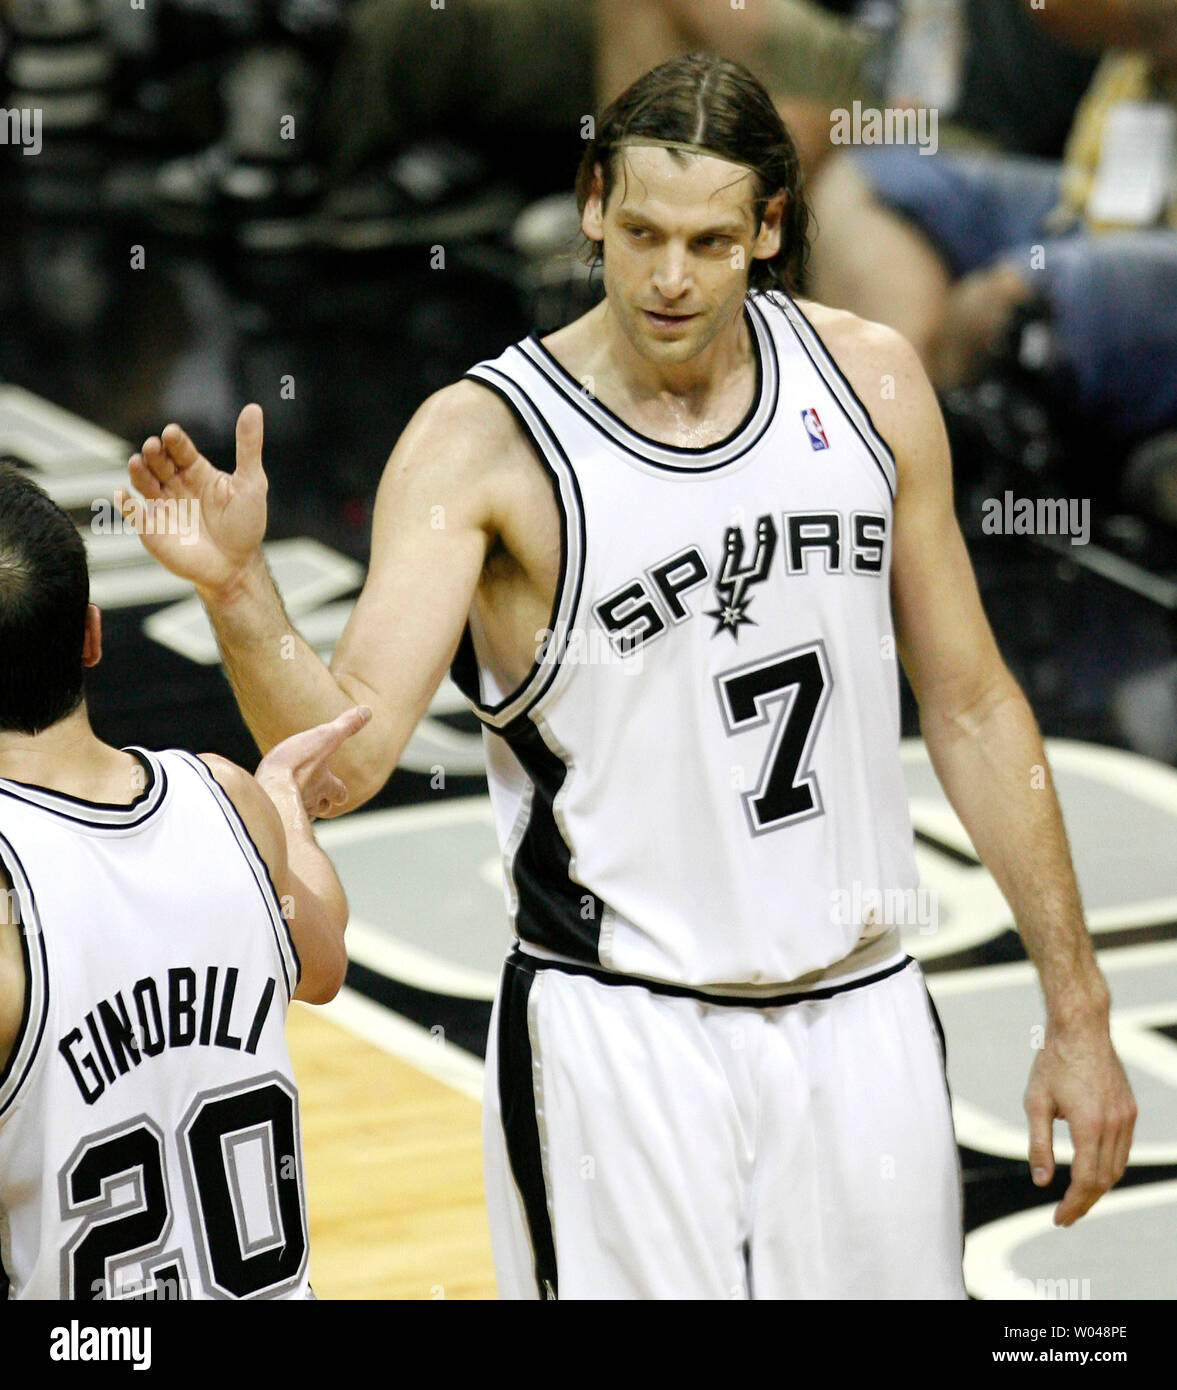 San Antonio Spurs guard Manu Ginobili (L) congratulates San Antonio Spurs Fabricio Oberto (R) after a key defensive stop against the Utah Jazz in the second half of game two of the NBA Western Conference finals at AT&T Center in San Antonio on May 22, 2007. The Spurs defeated the Jazz 105-96 to take a 2-0 lead in the best of seven series. (UPI Photo/Aaron M. Sprecher) Stock Photo